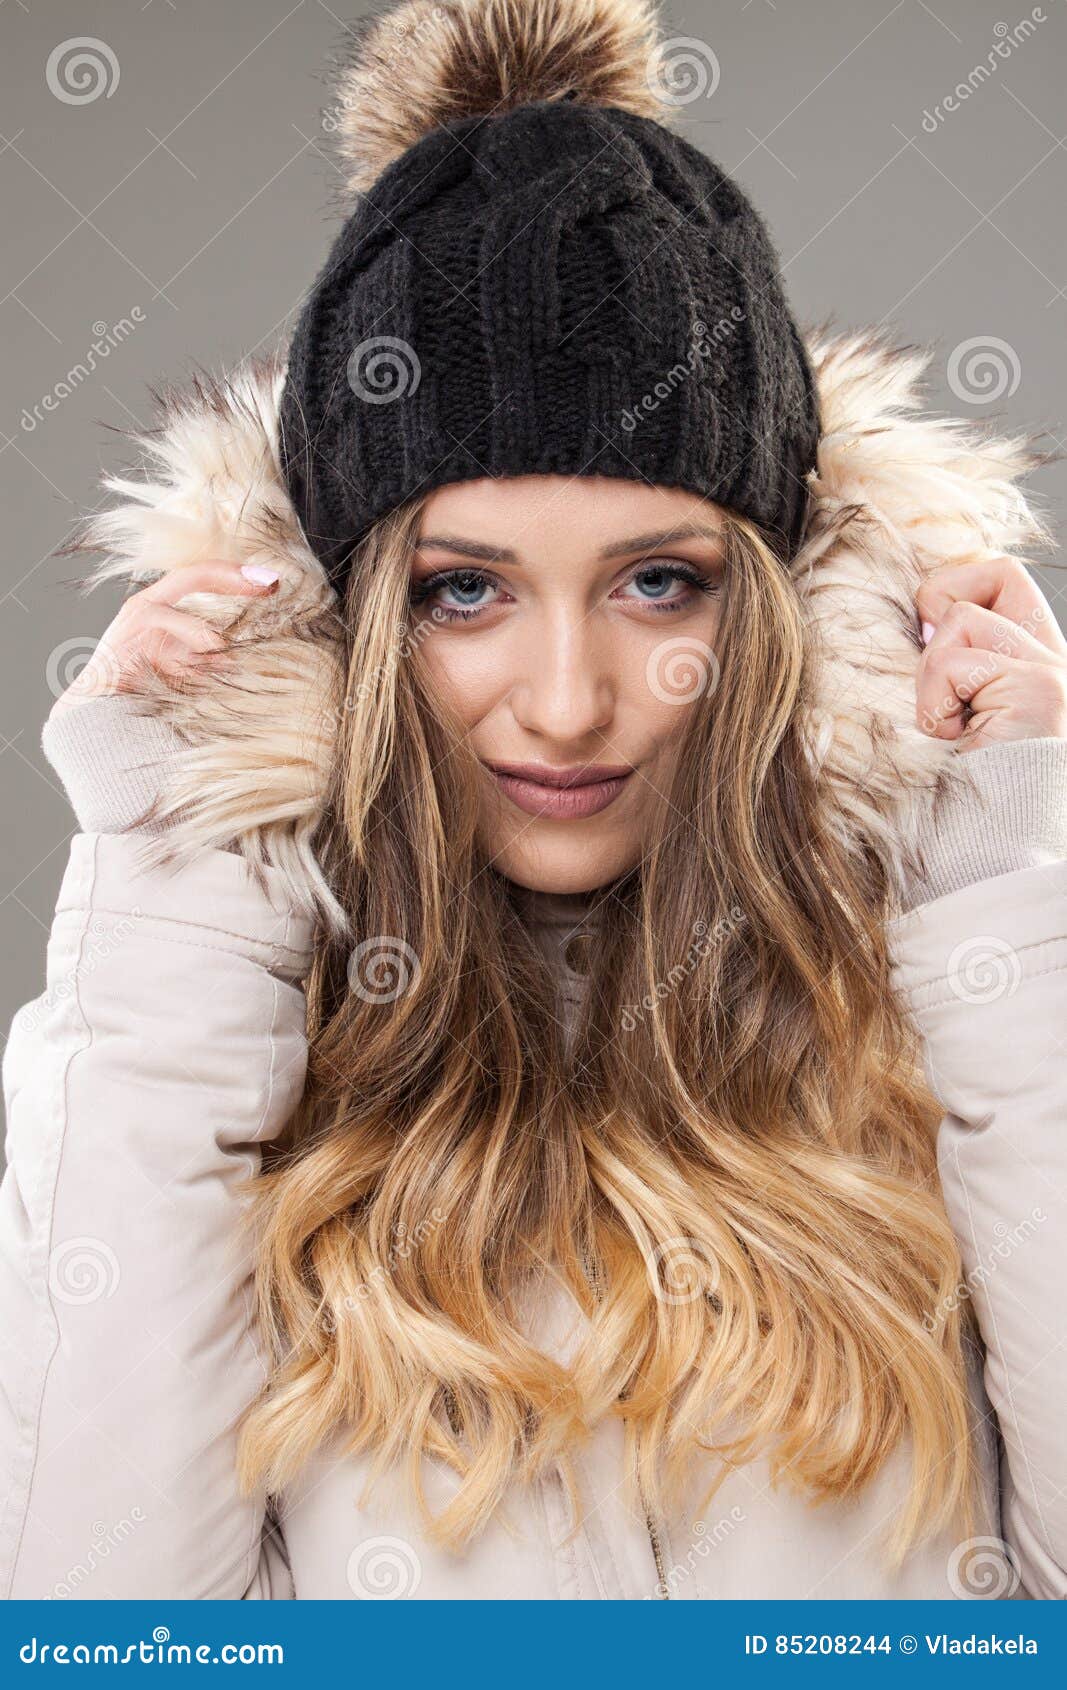 natural beauty - intense winter portrait , 20-24 years, adult, c